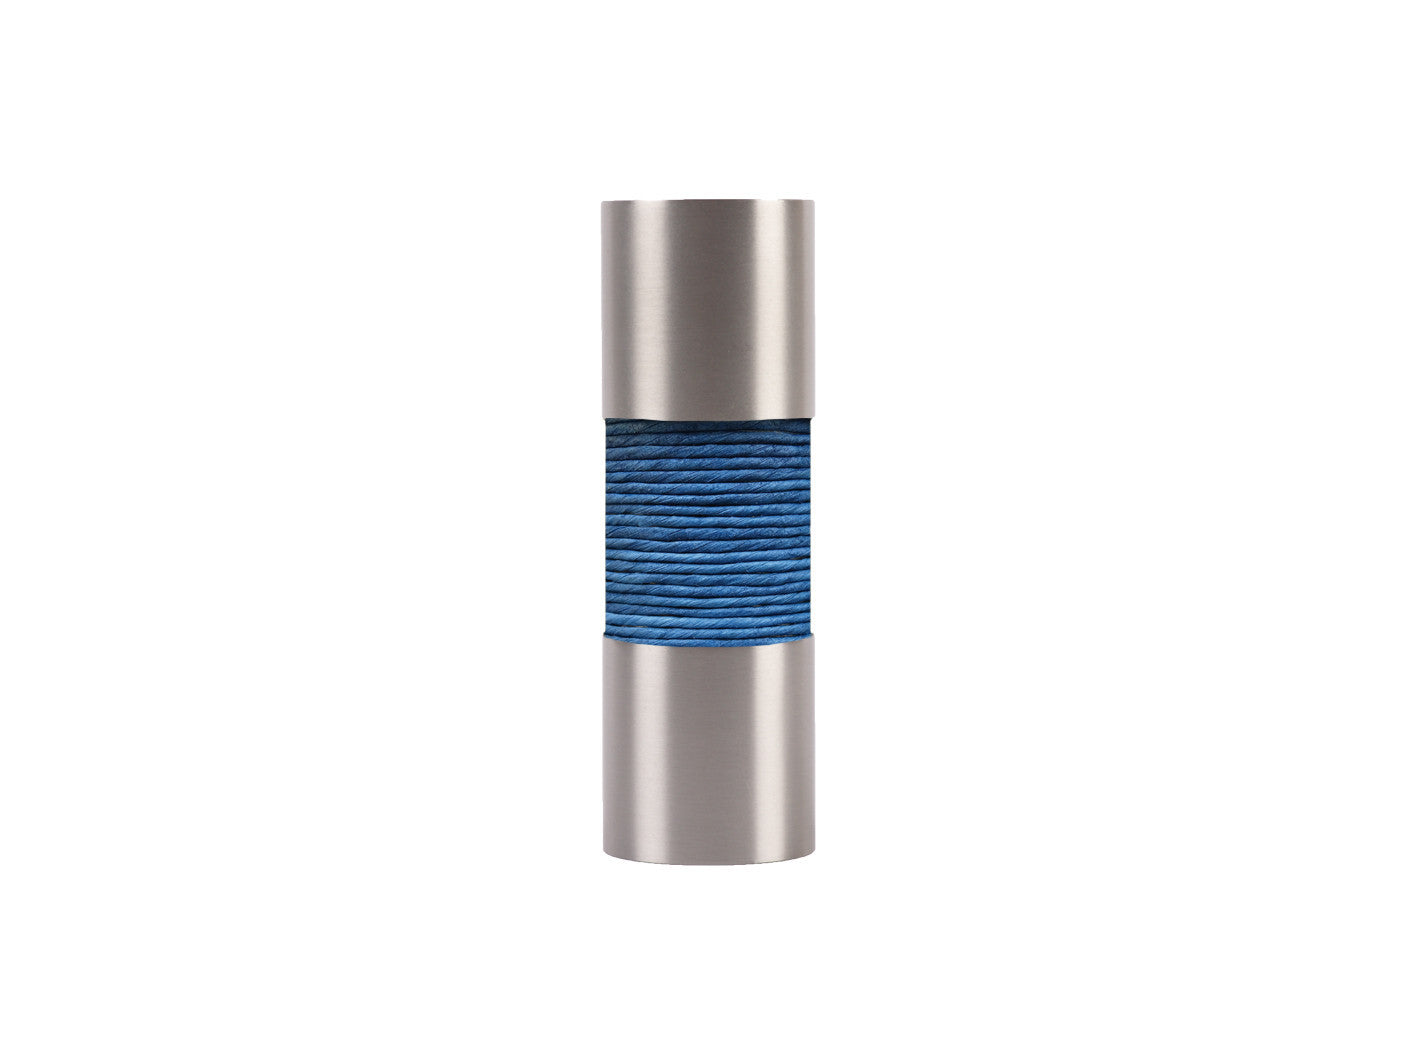 Lapis blue curtain pole finial, stainless steel barrel, for 19mm diameter pole